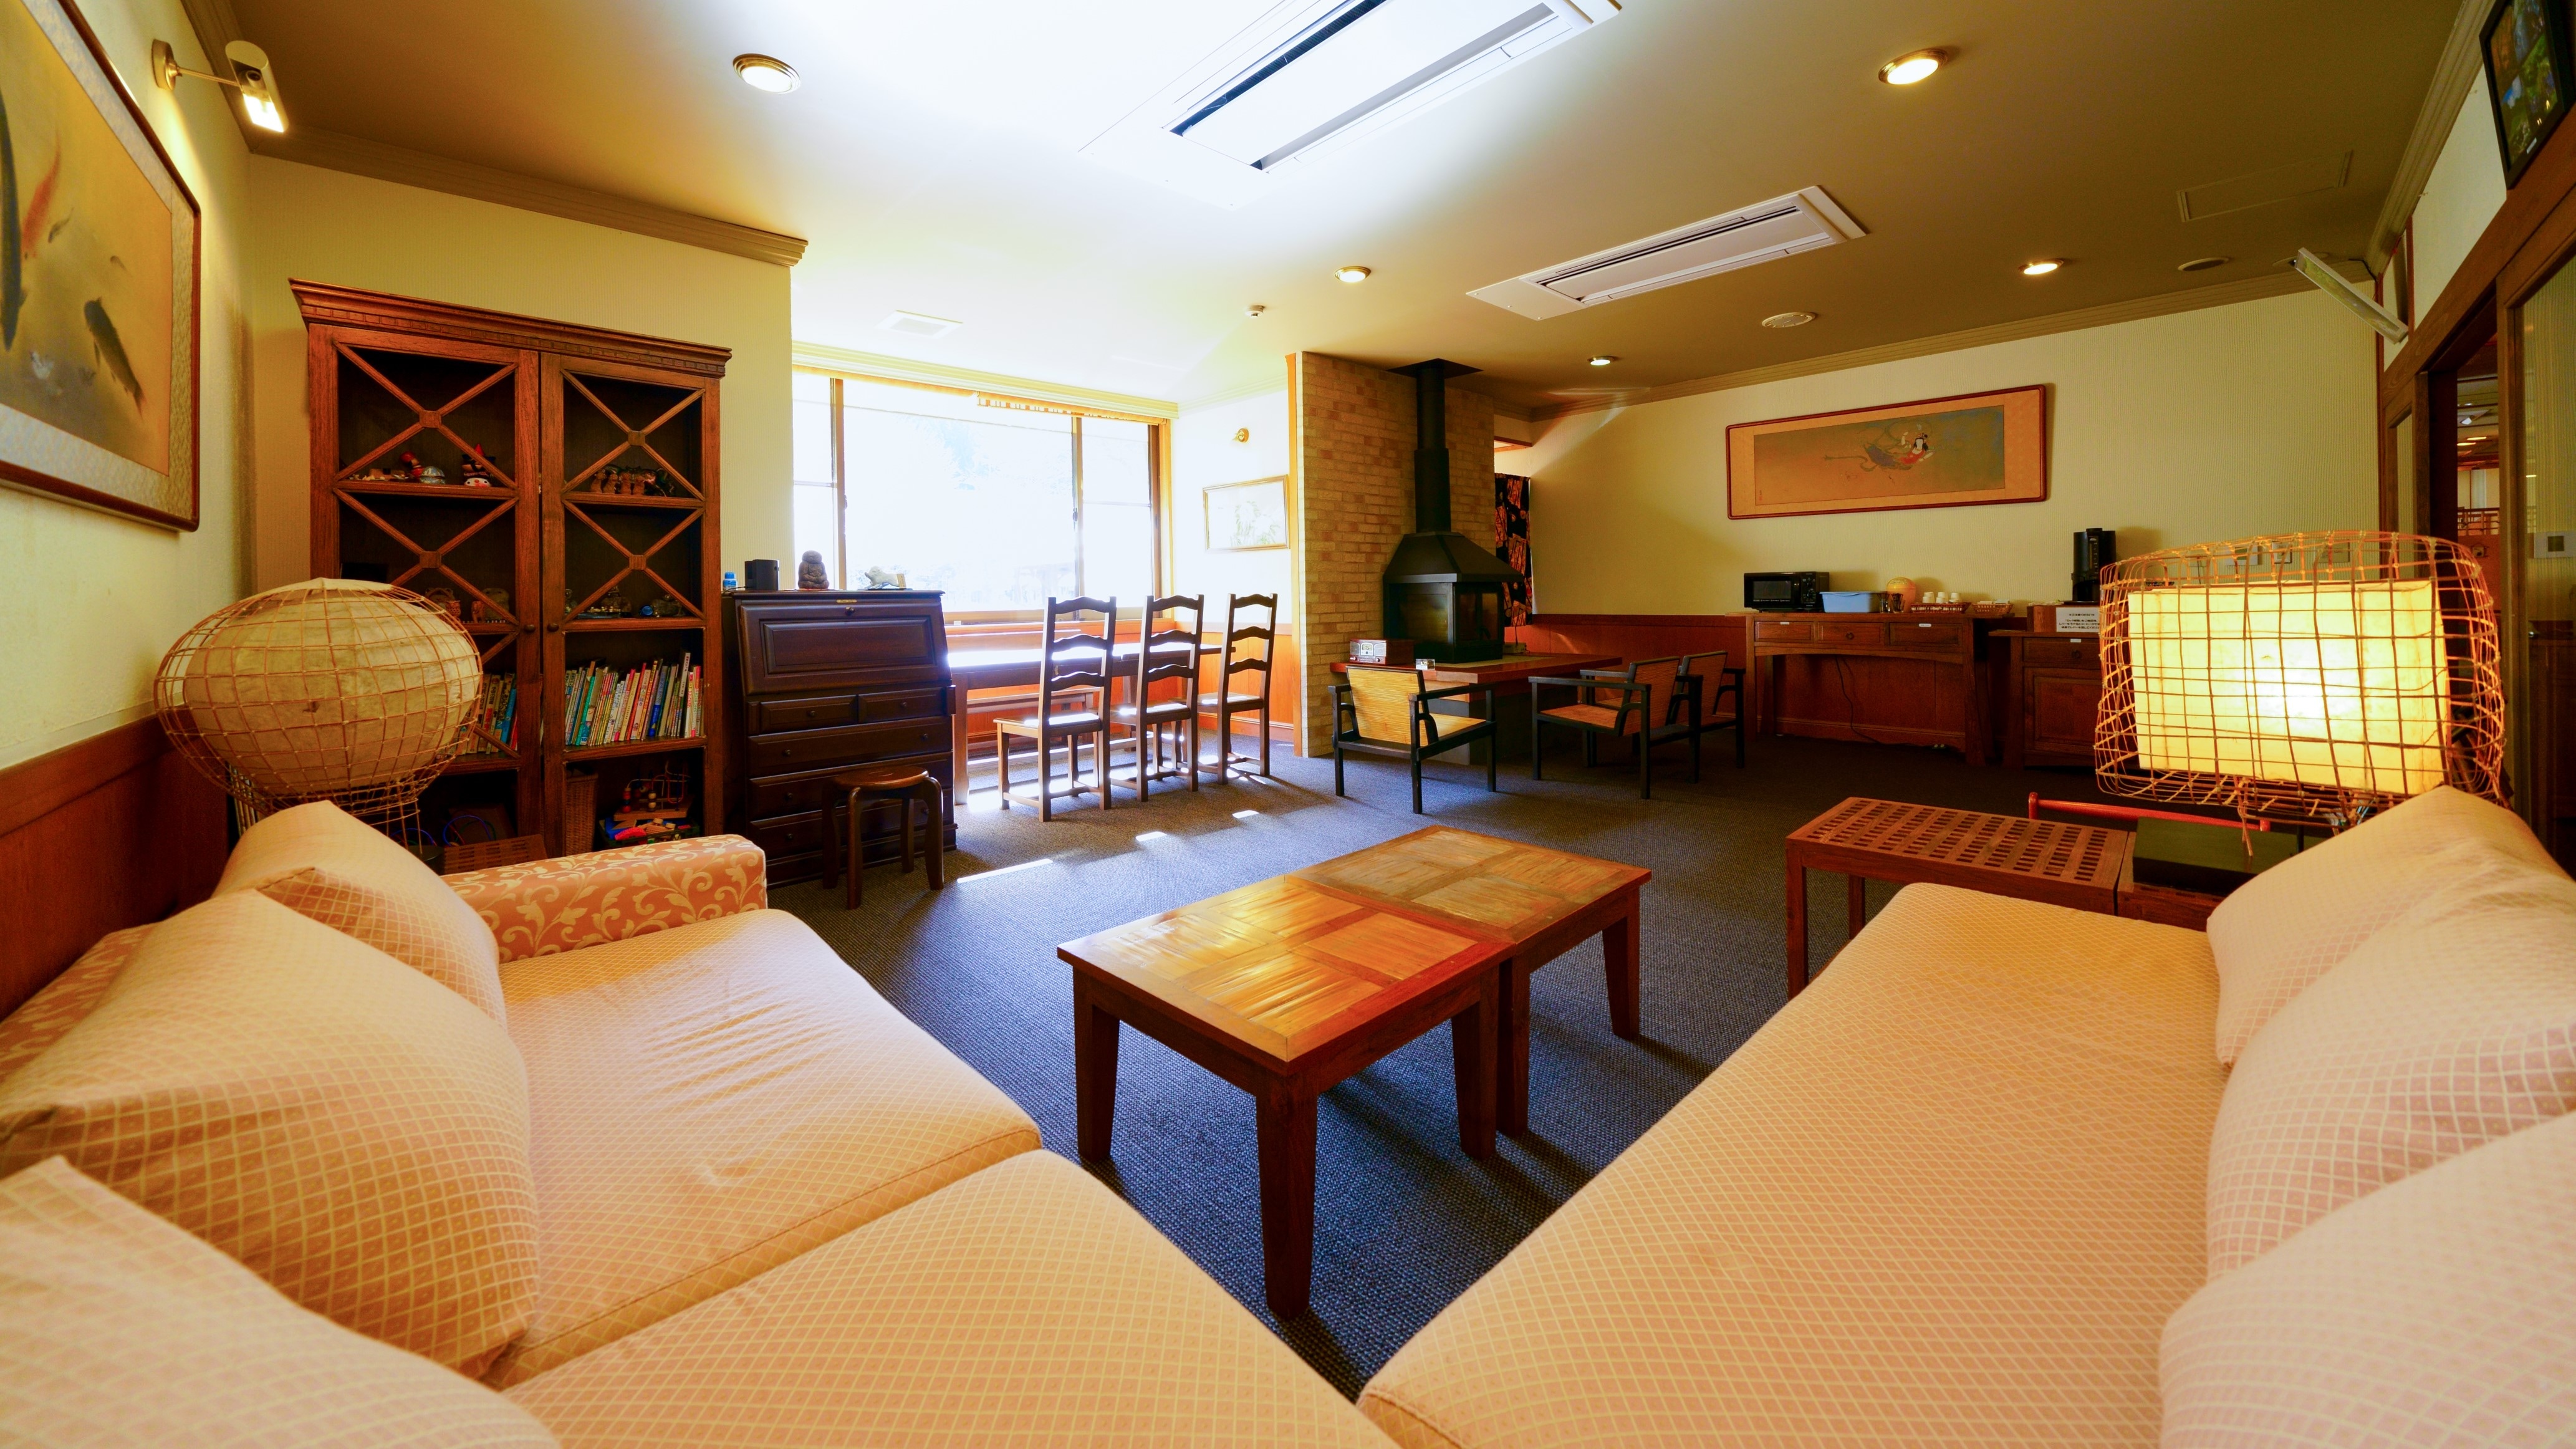 Accommodation building "1st floor lounge"